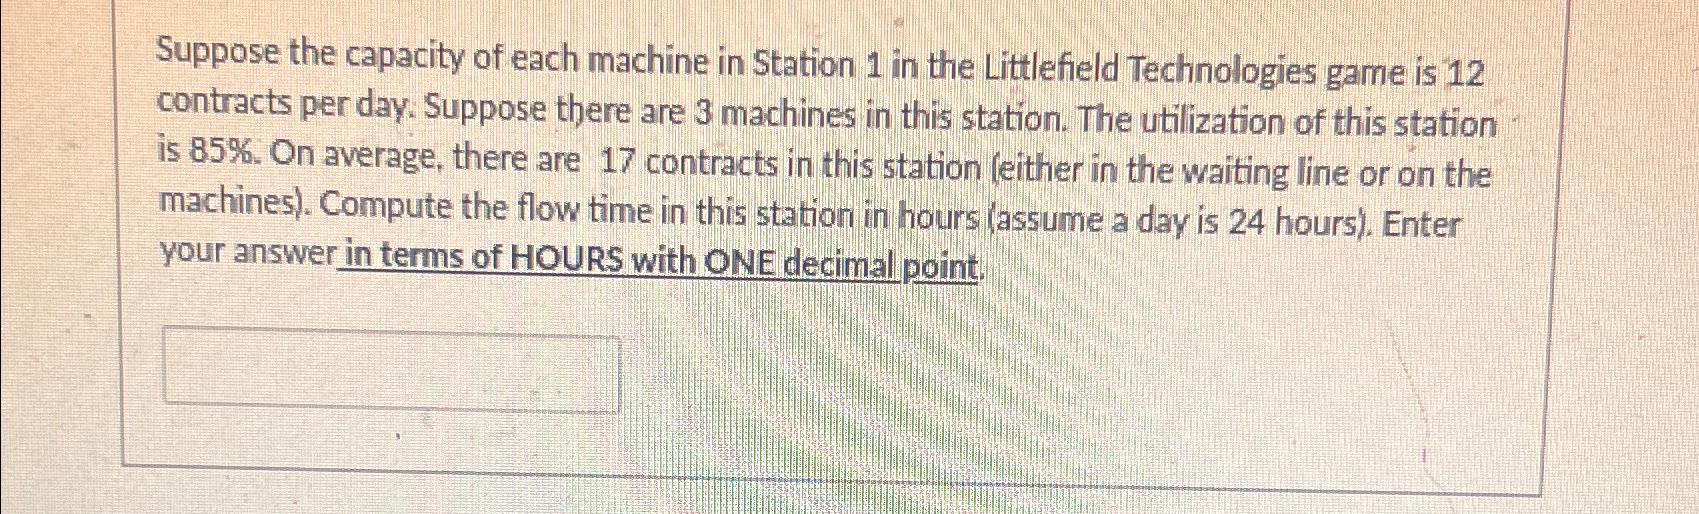 Suppose the capacity of each machine in Station 1 in the Littlefield Technologies game is 12 contracts per